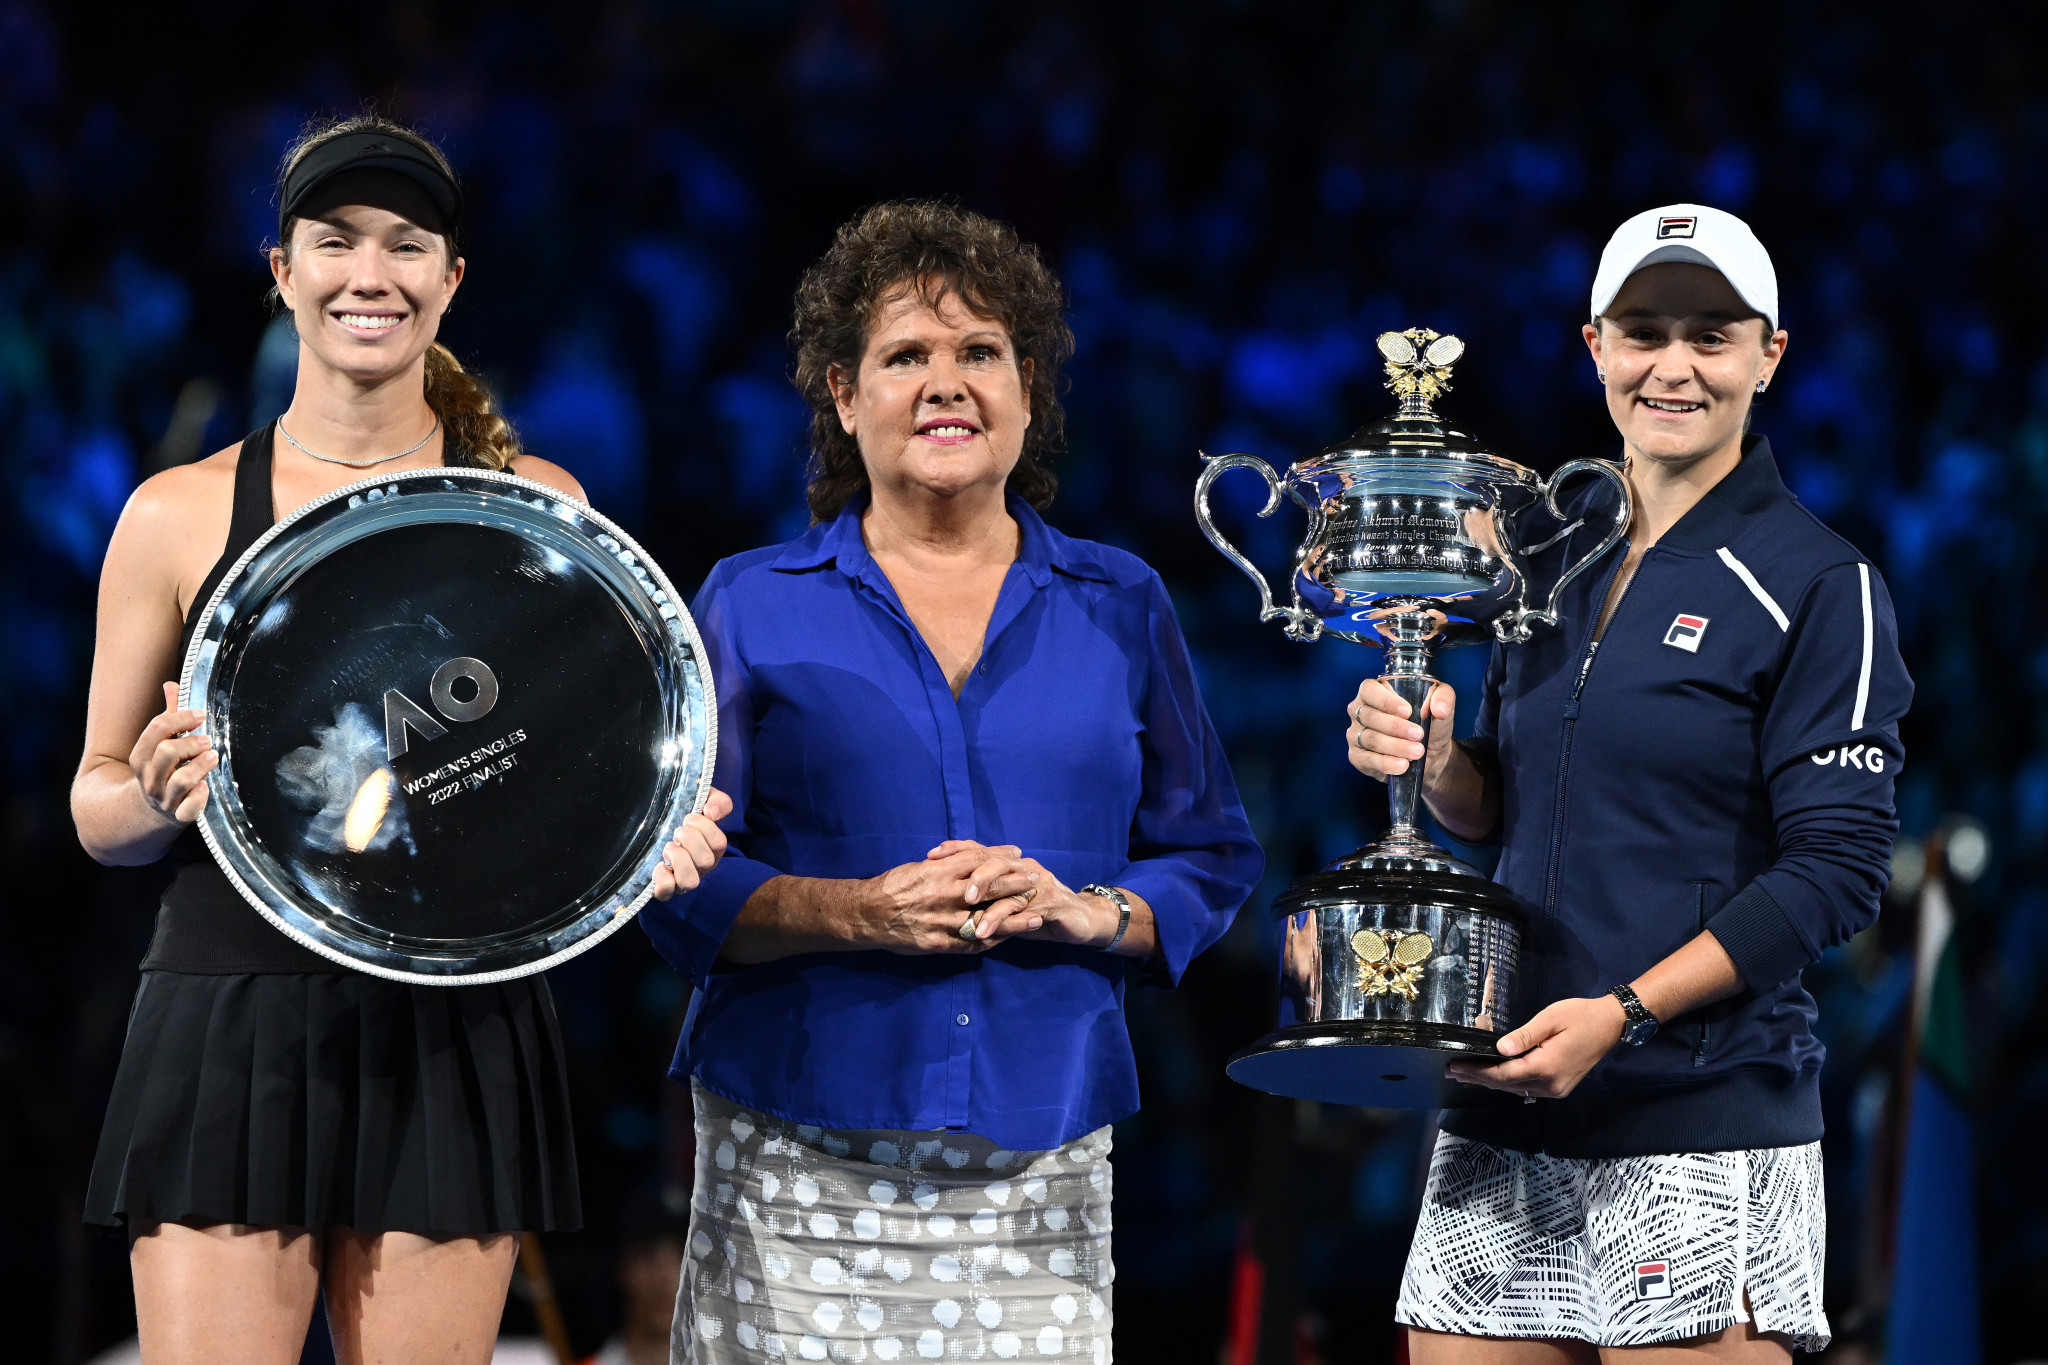 Former Australian Open finalist Evonne Goolagong Cawley presented the trophies following the women's final ©Getty Images